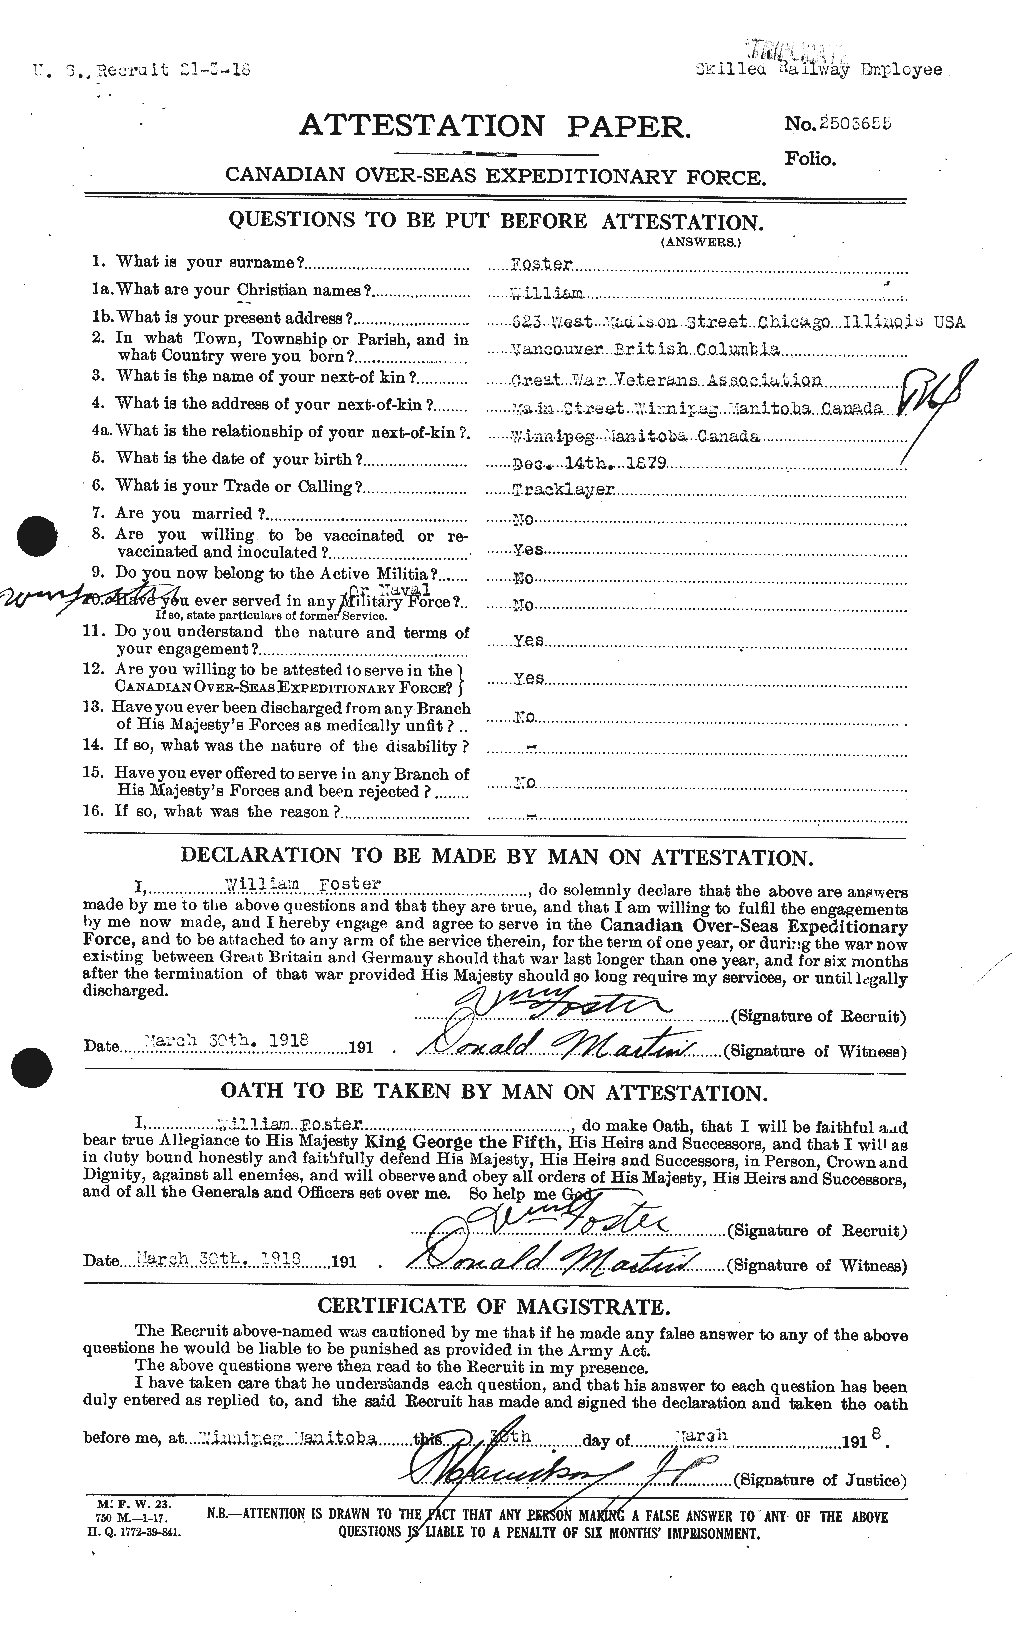 Personnel Records of the First World War - CEF 328718a